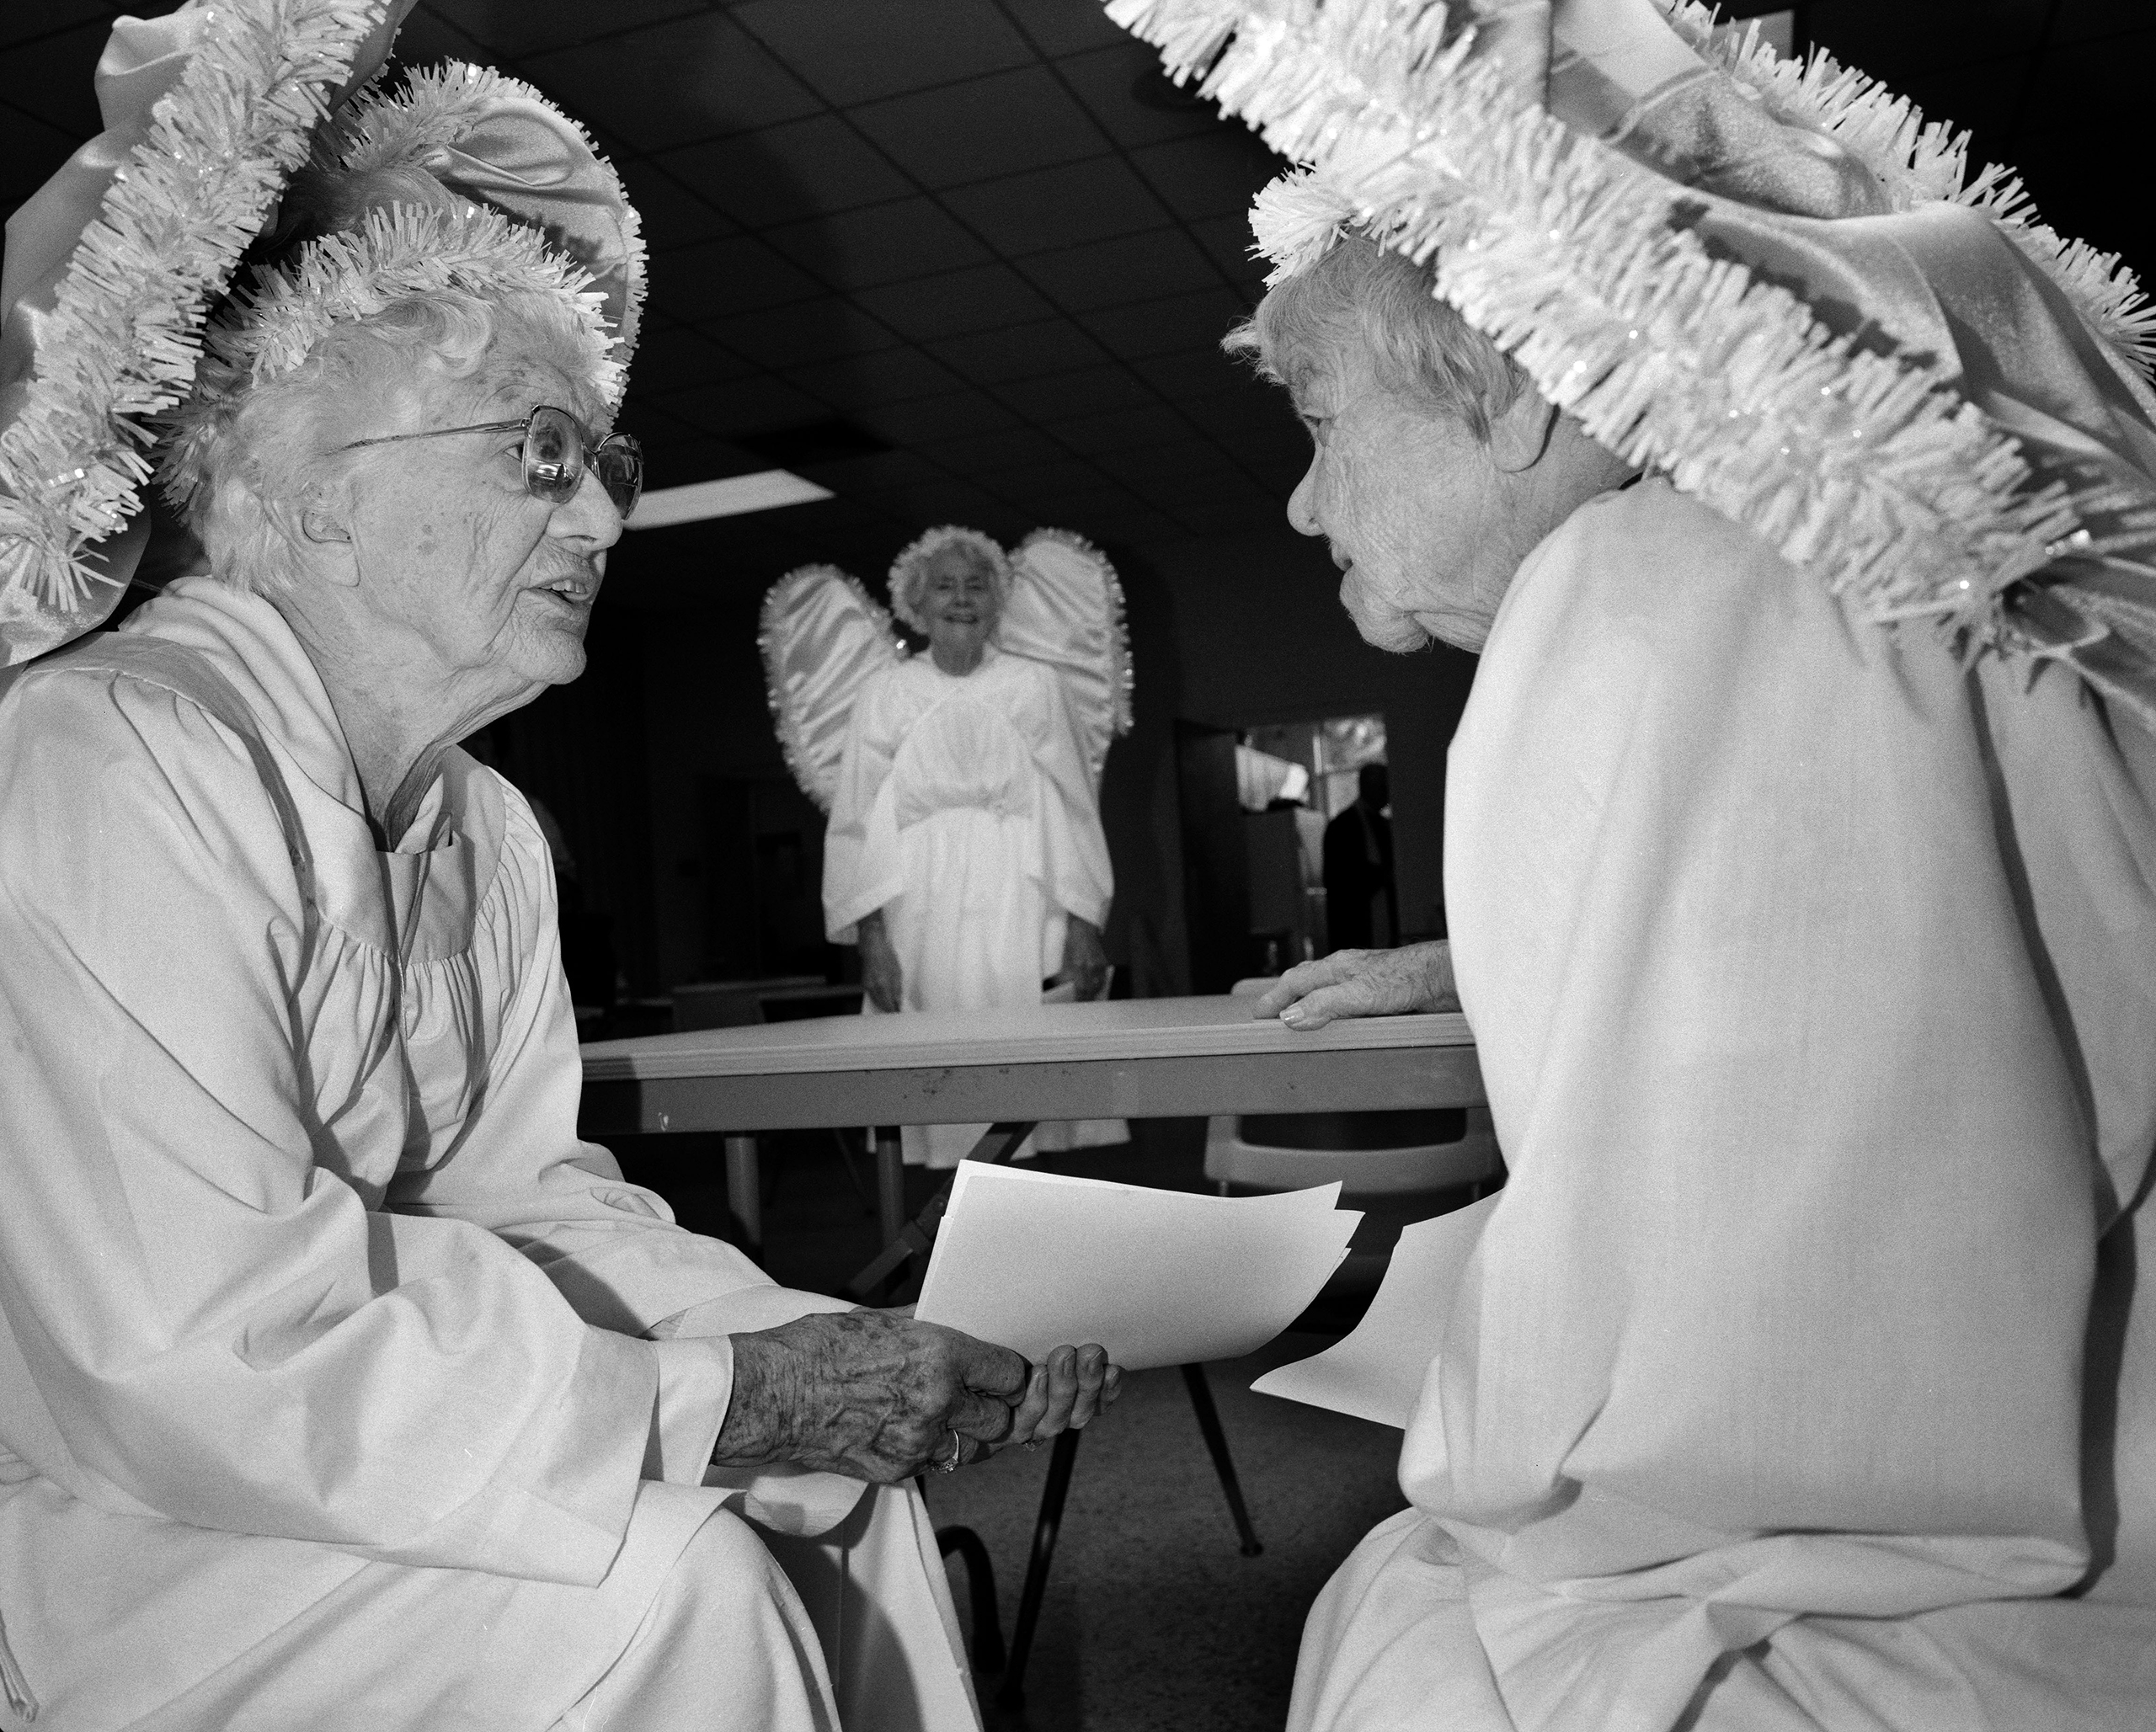 DeBary, FL. 1990.  First Presbyterian Church of De Bary. Old people dressed as angels for the annual Christmas pageant  The Birth of Jesus  performed by the members of the church.